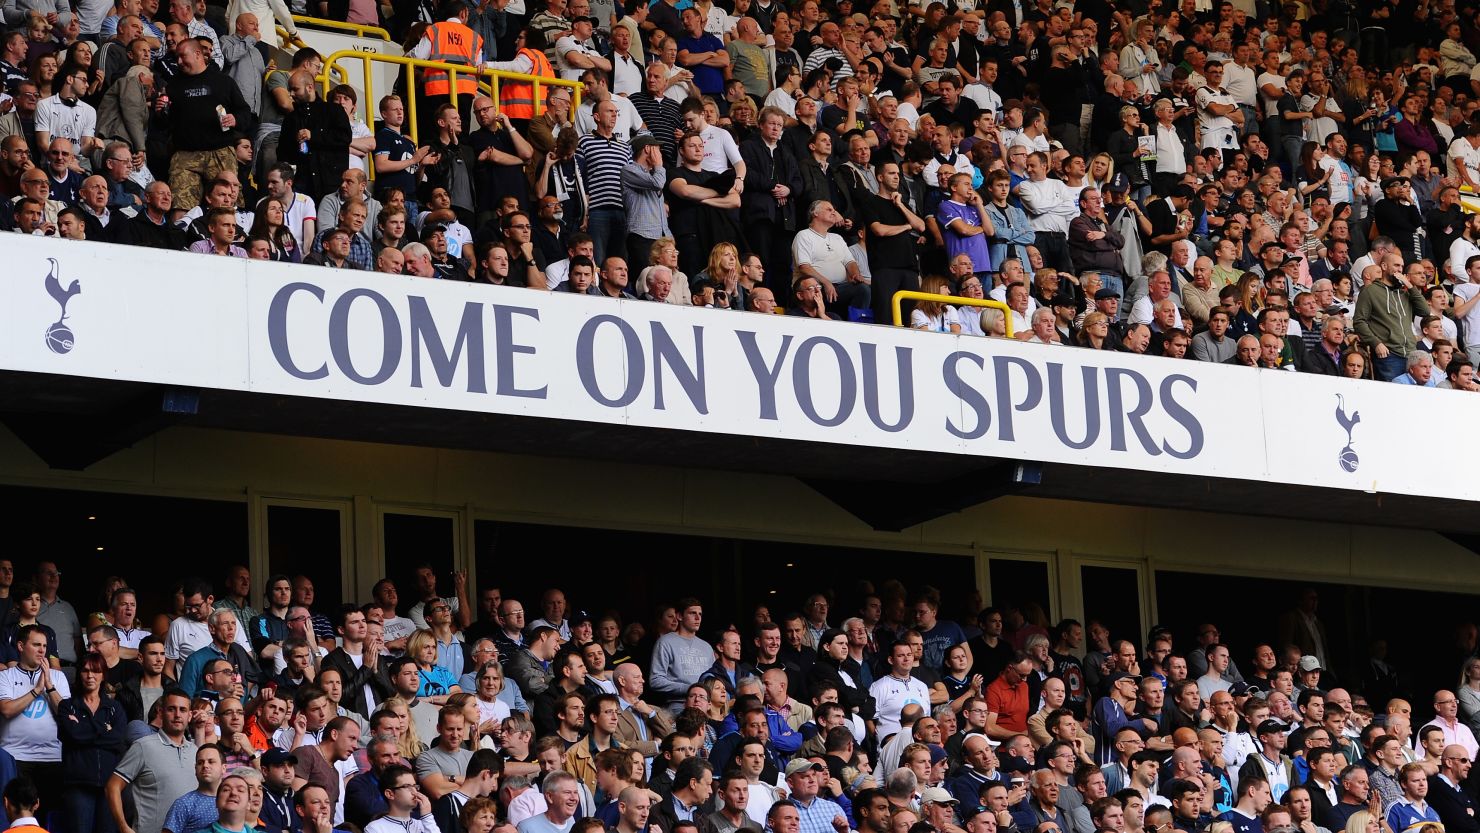 Spectators at the English Premier League match between Tottenham and West Ham at White Hart Lane on October 6.